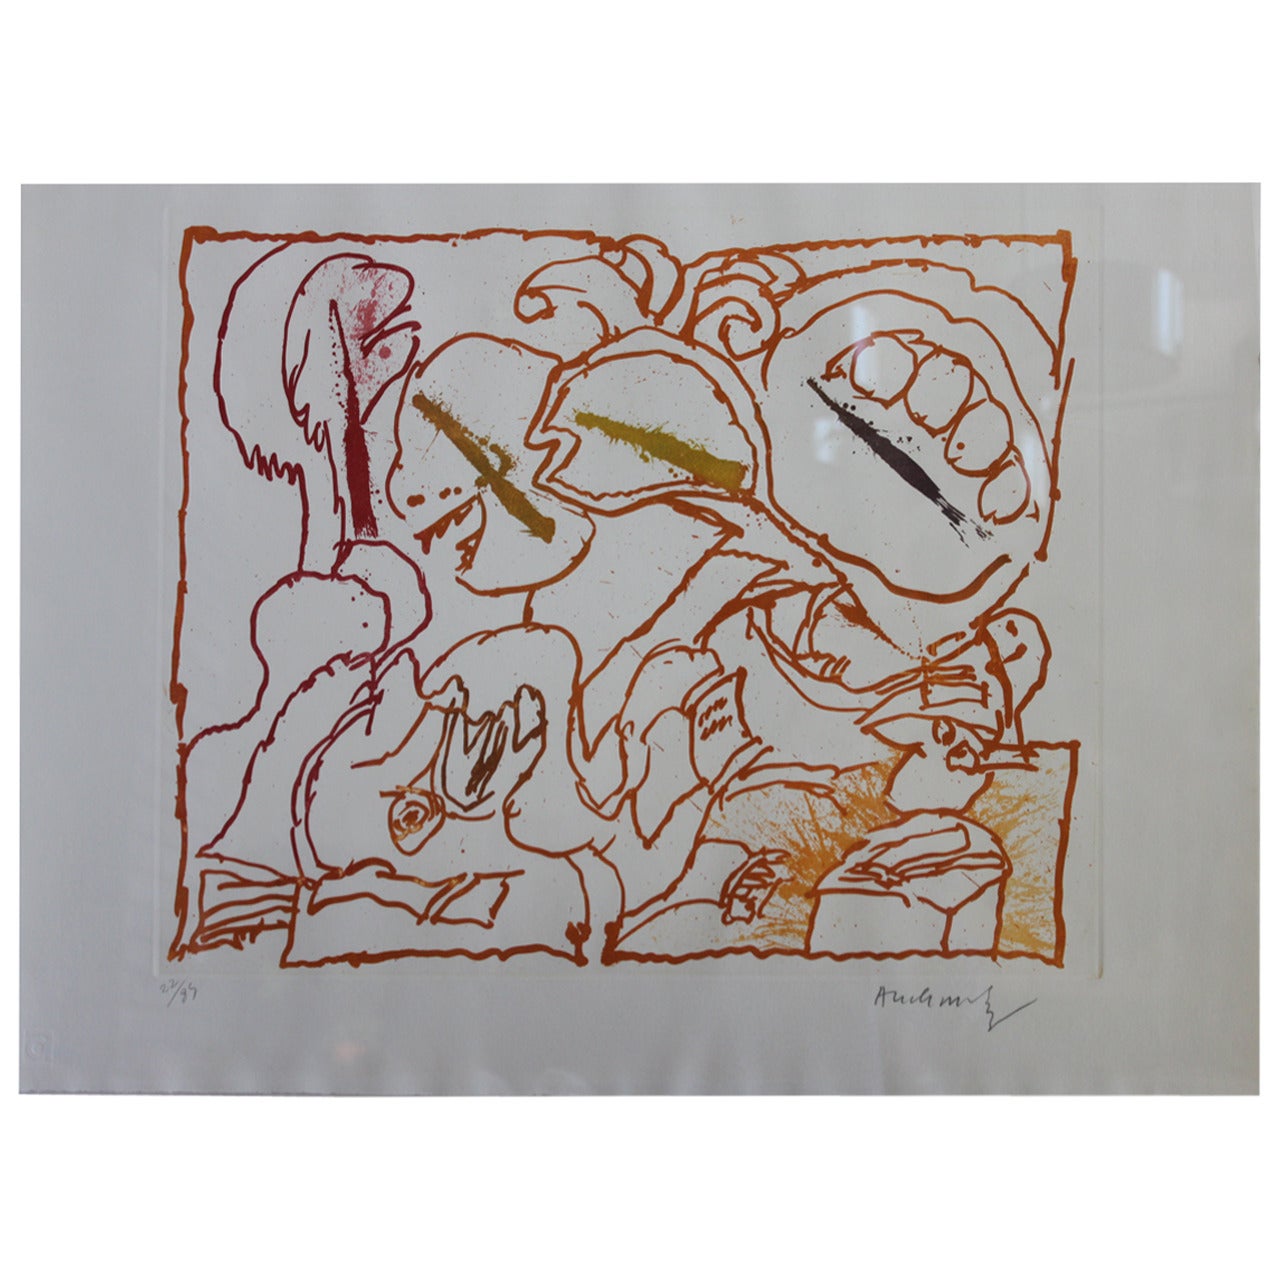 "Janvier Orange" Print by Pierre Alechinsky Signed and Numbered, 1968